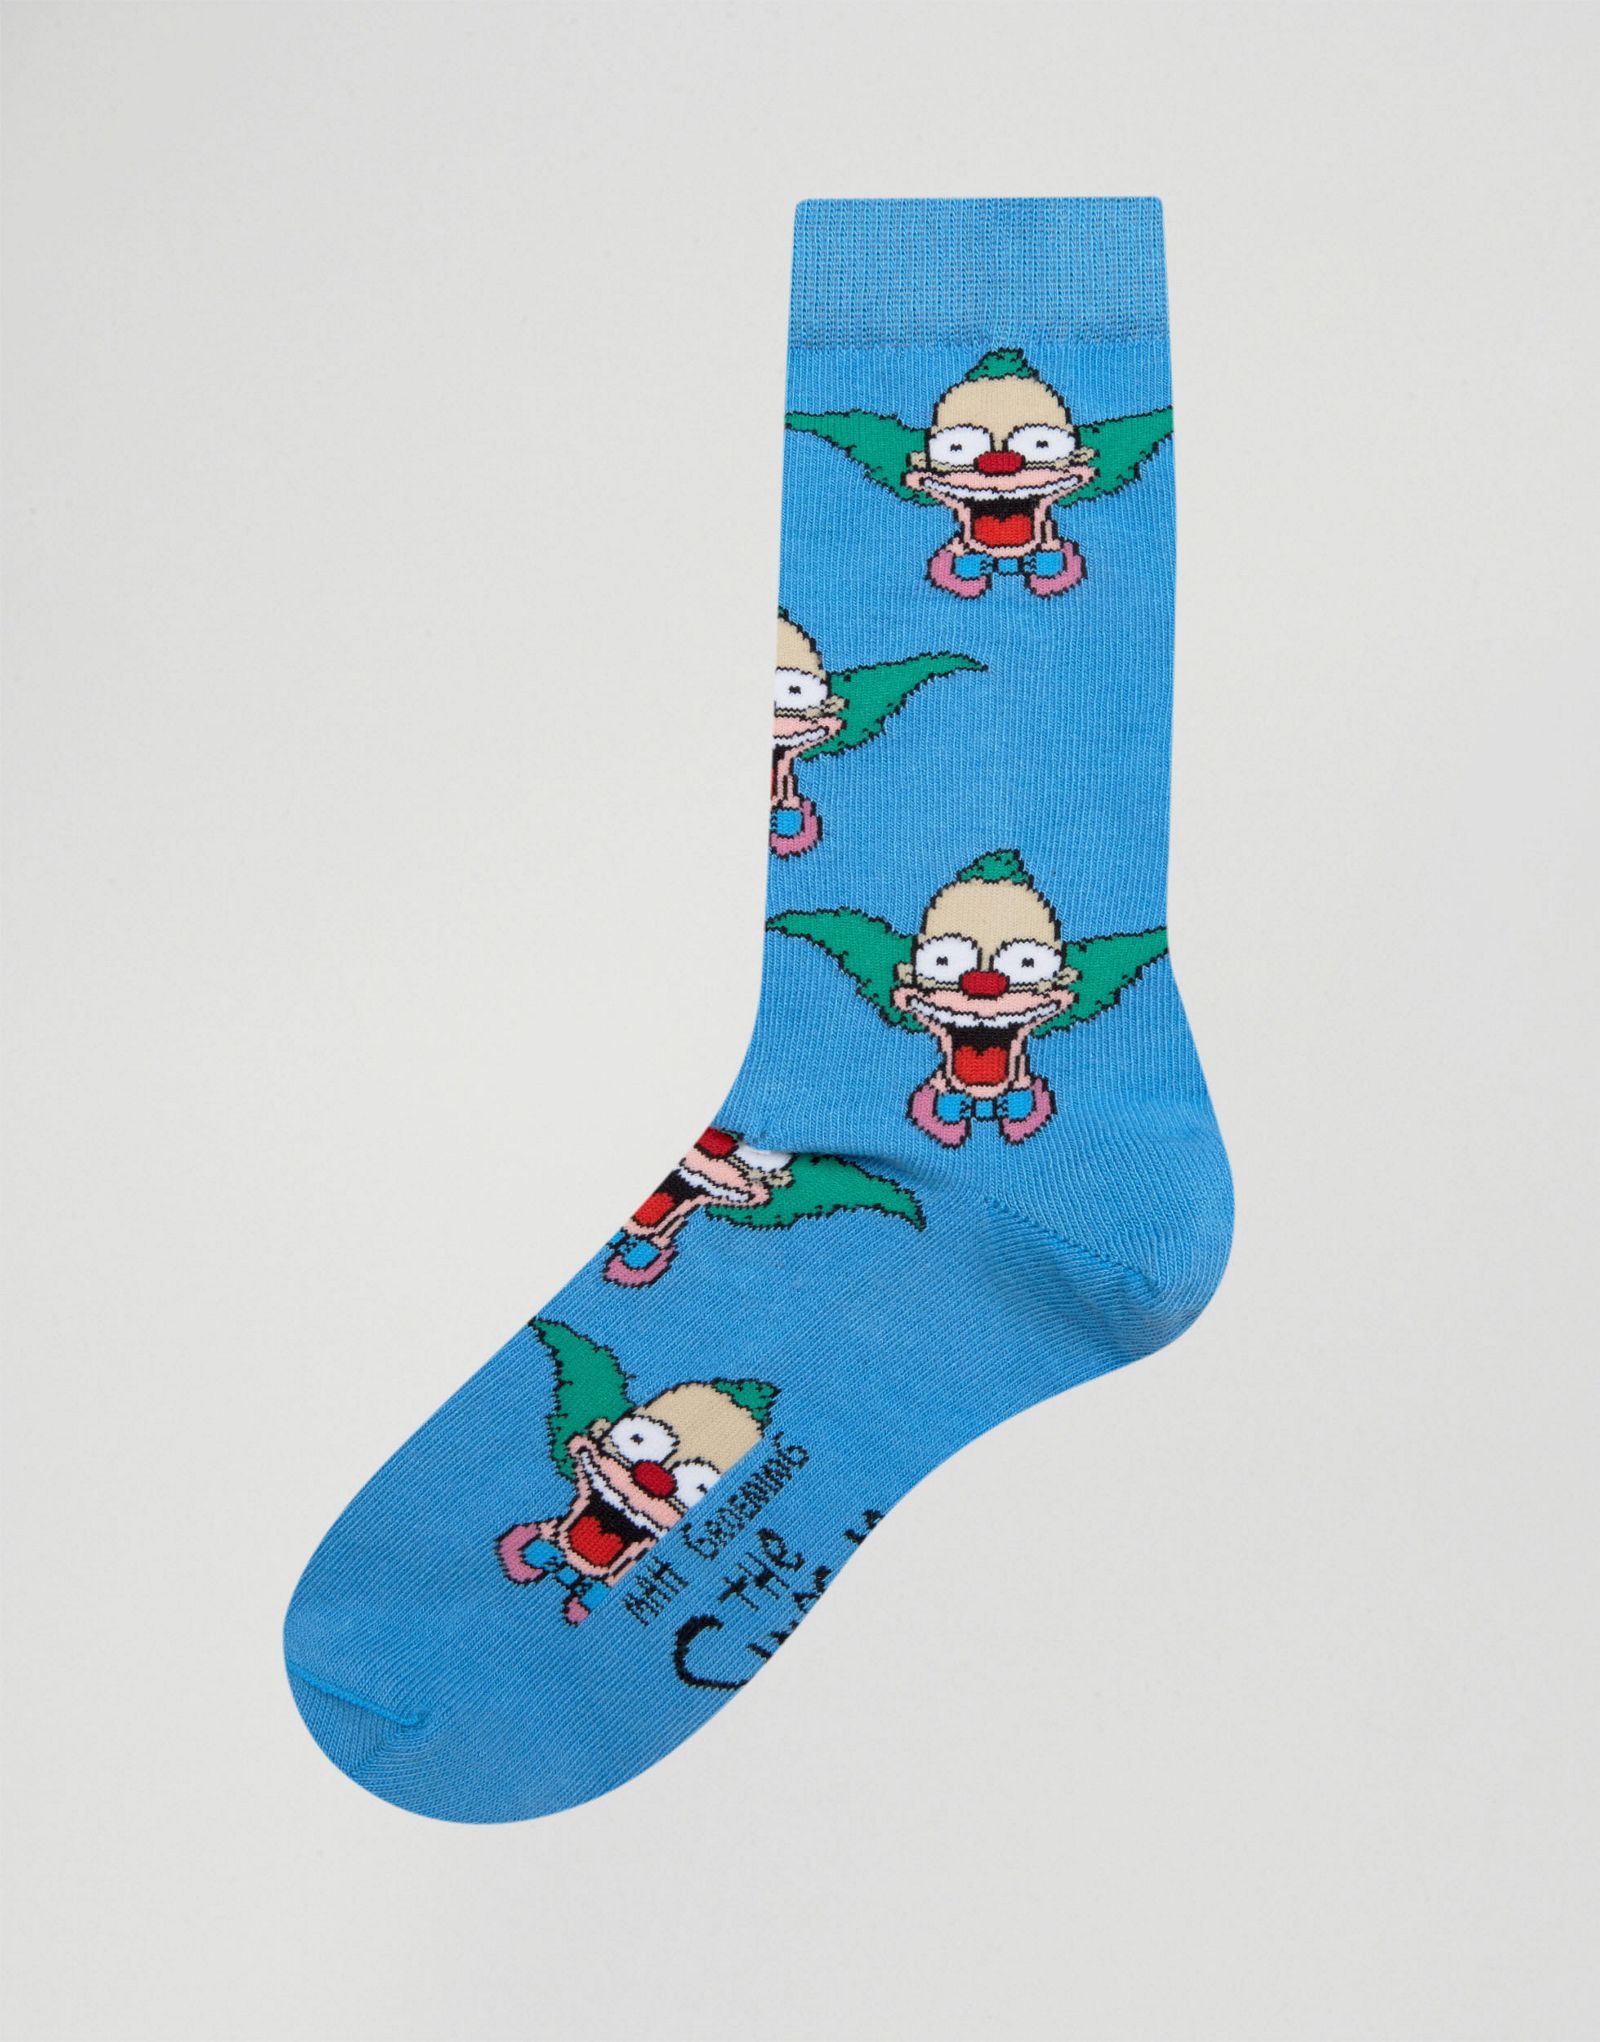 ASOS Socks With Simpsons Design 2 Pack